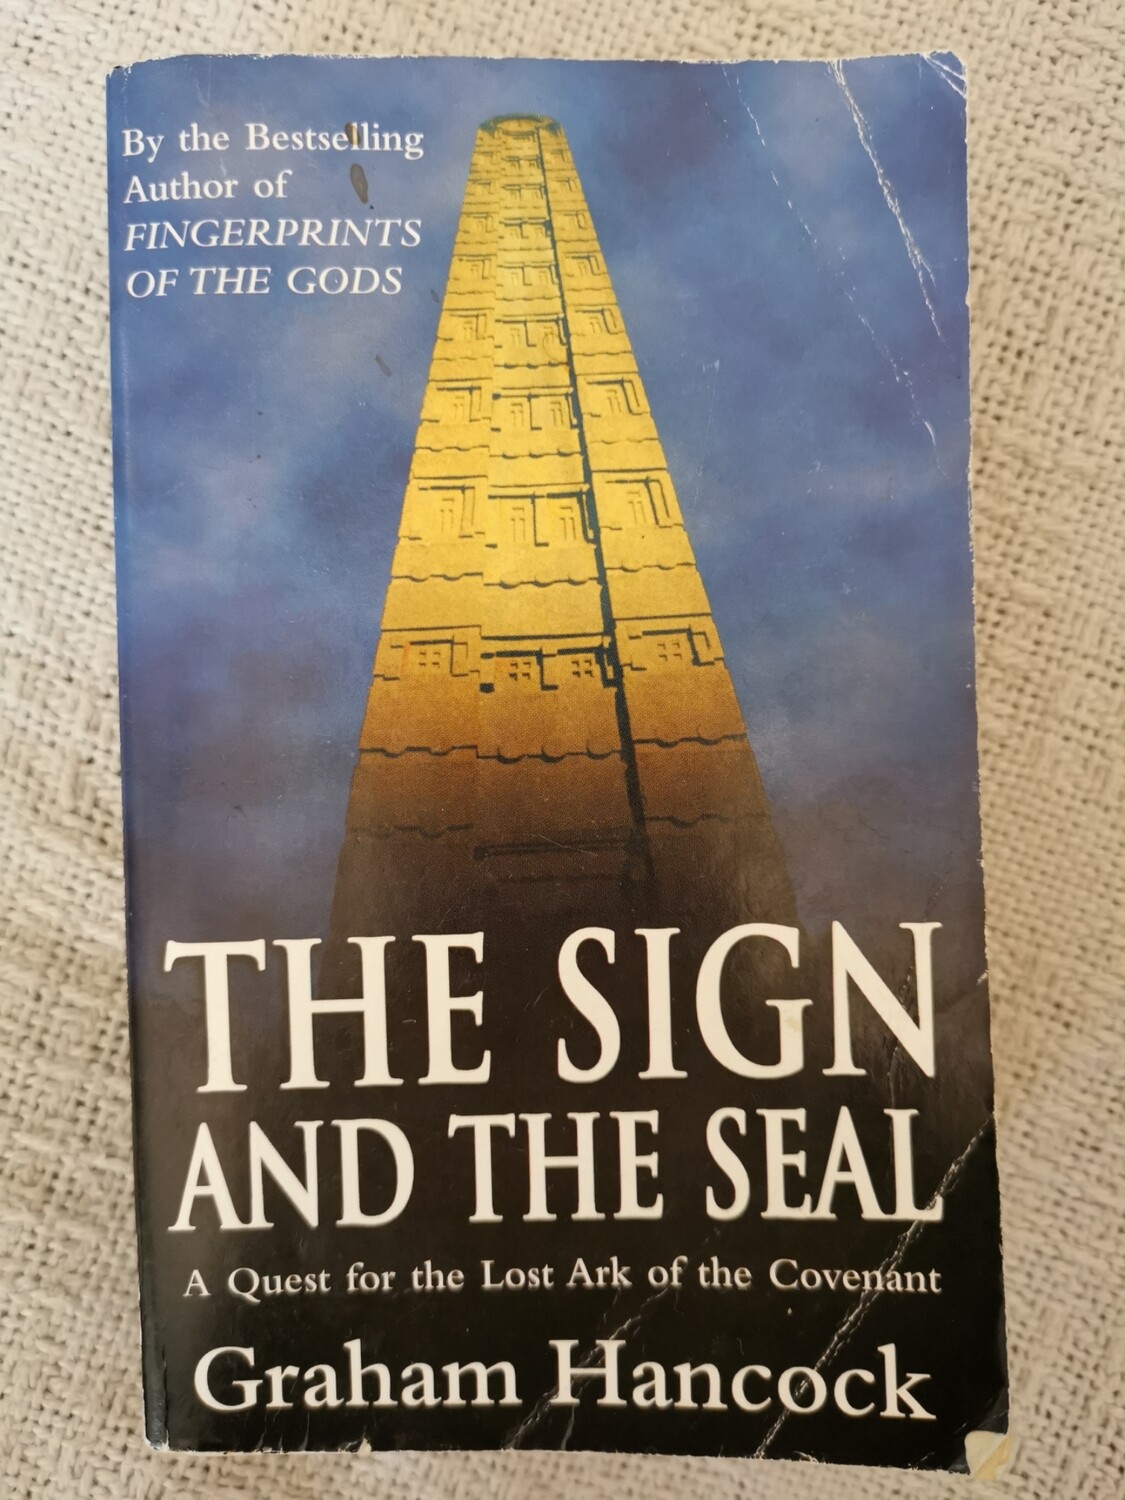 The sign and the seal, Graham Hancock